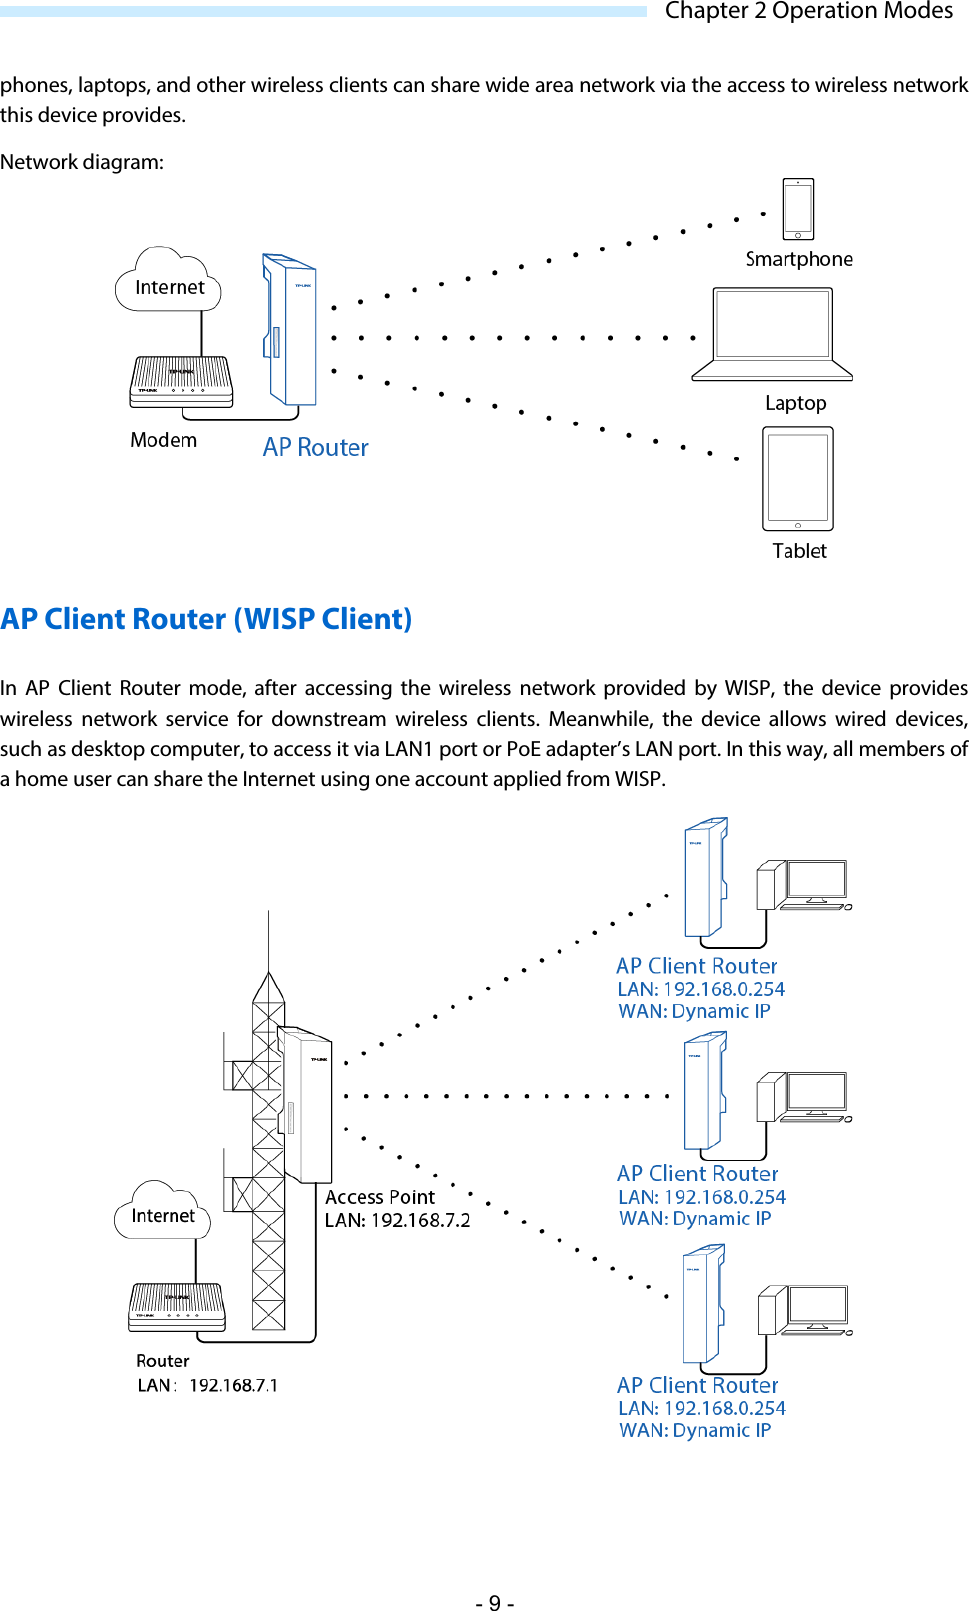  Chapter 2 Operation Modes phones, laptops, and other wireless clients can share wide area network via the access to wireless network this device provides. Network diagram:  AP Client Router (WISP Client) In  AP Client Router mode,  after accessing the wireless network provided by WISP, the device provides wireless network service for downstream wireless clients. Meanwhile, the device allows wired devices, such as desktop computer, to access it via LAN1 port or PoE adapter’s LAN port. In this way, all members of a home user can share the Internet using one account applied from WISP.   - 9 - 